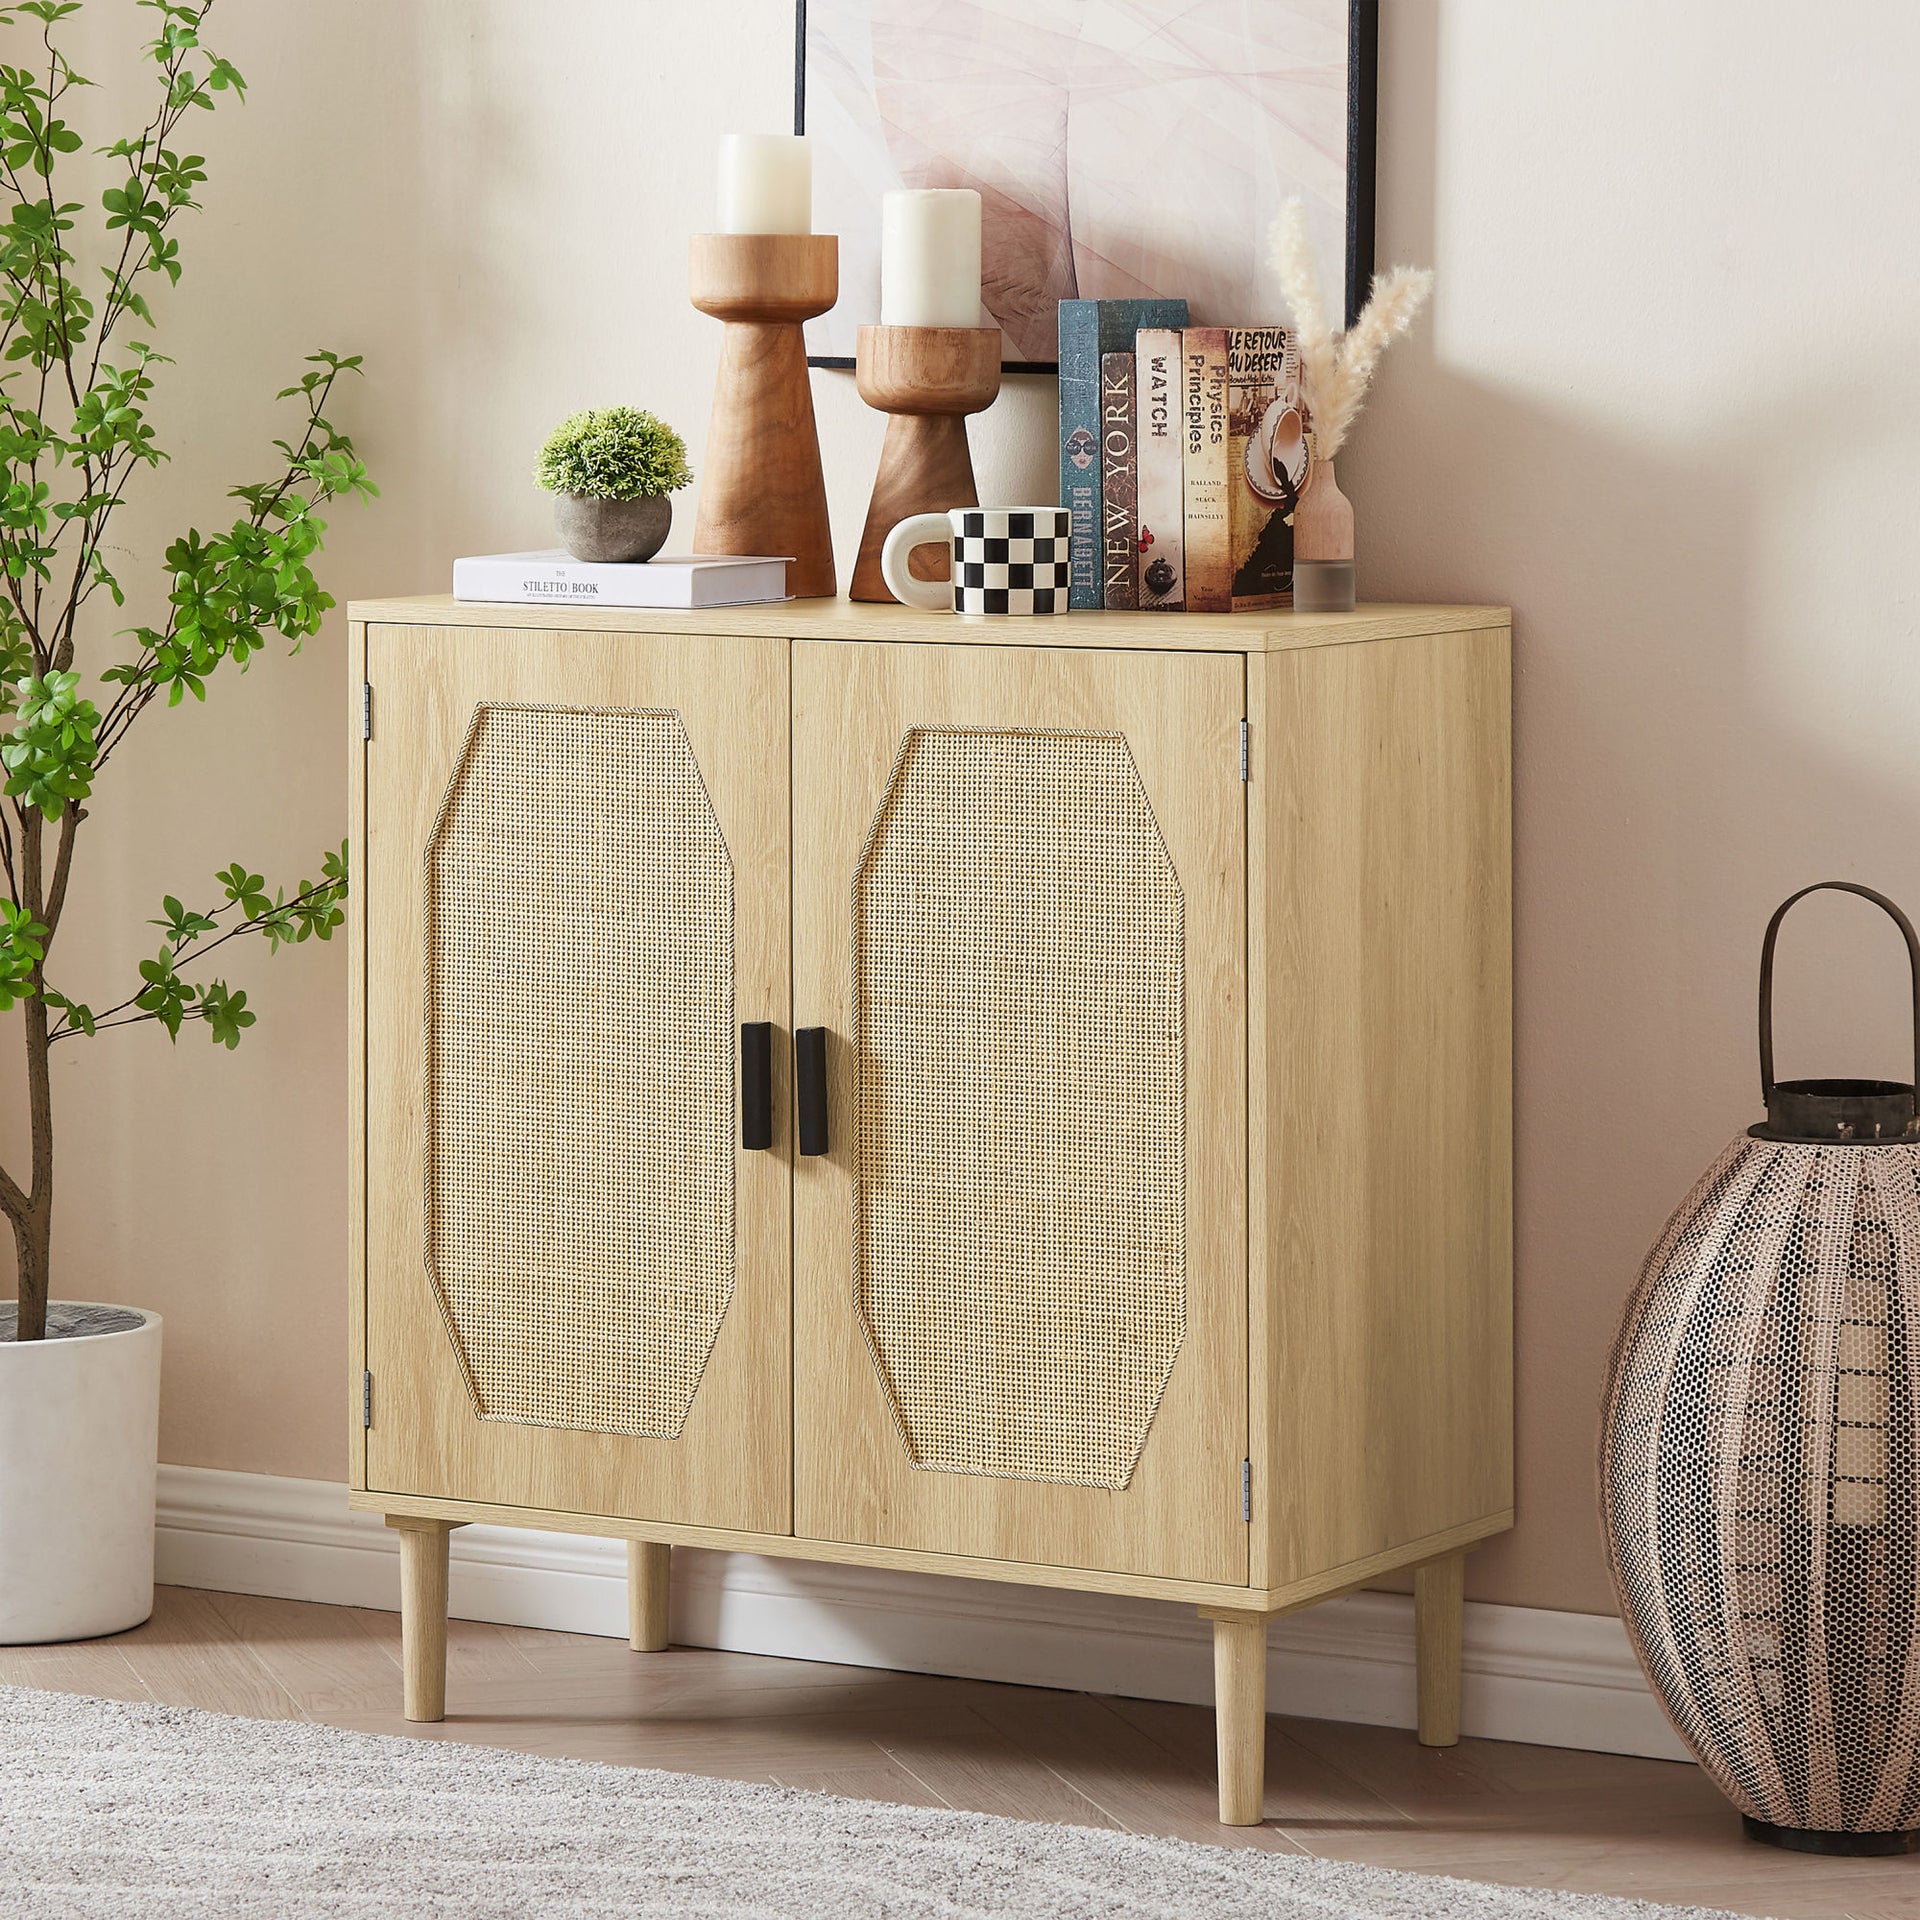 Storage cabinets with rattan decorative doors, Natural, 31.5''W X 15.8''D X 34.6"H.